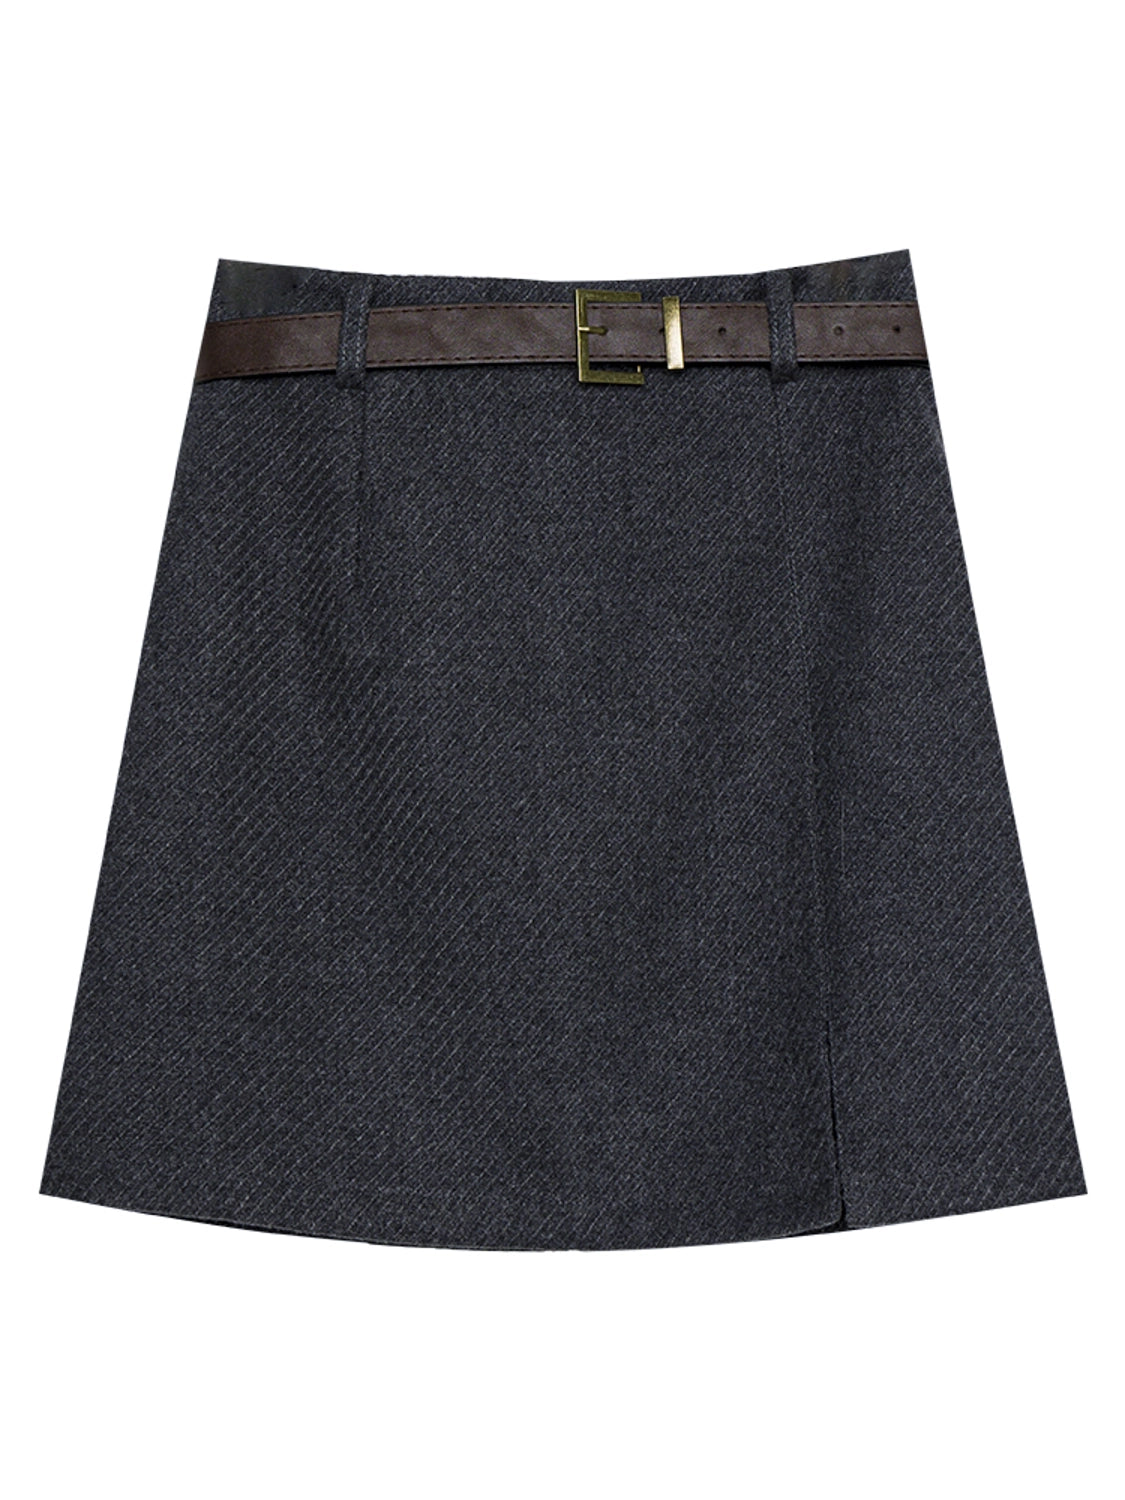 Modern Mini A-Line Skirt with Belted Waist for Trendy Women's Outfits